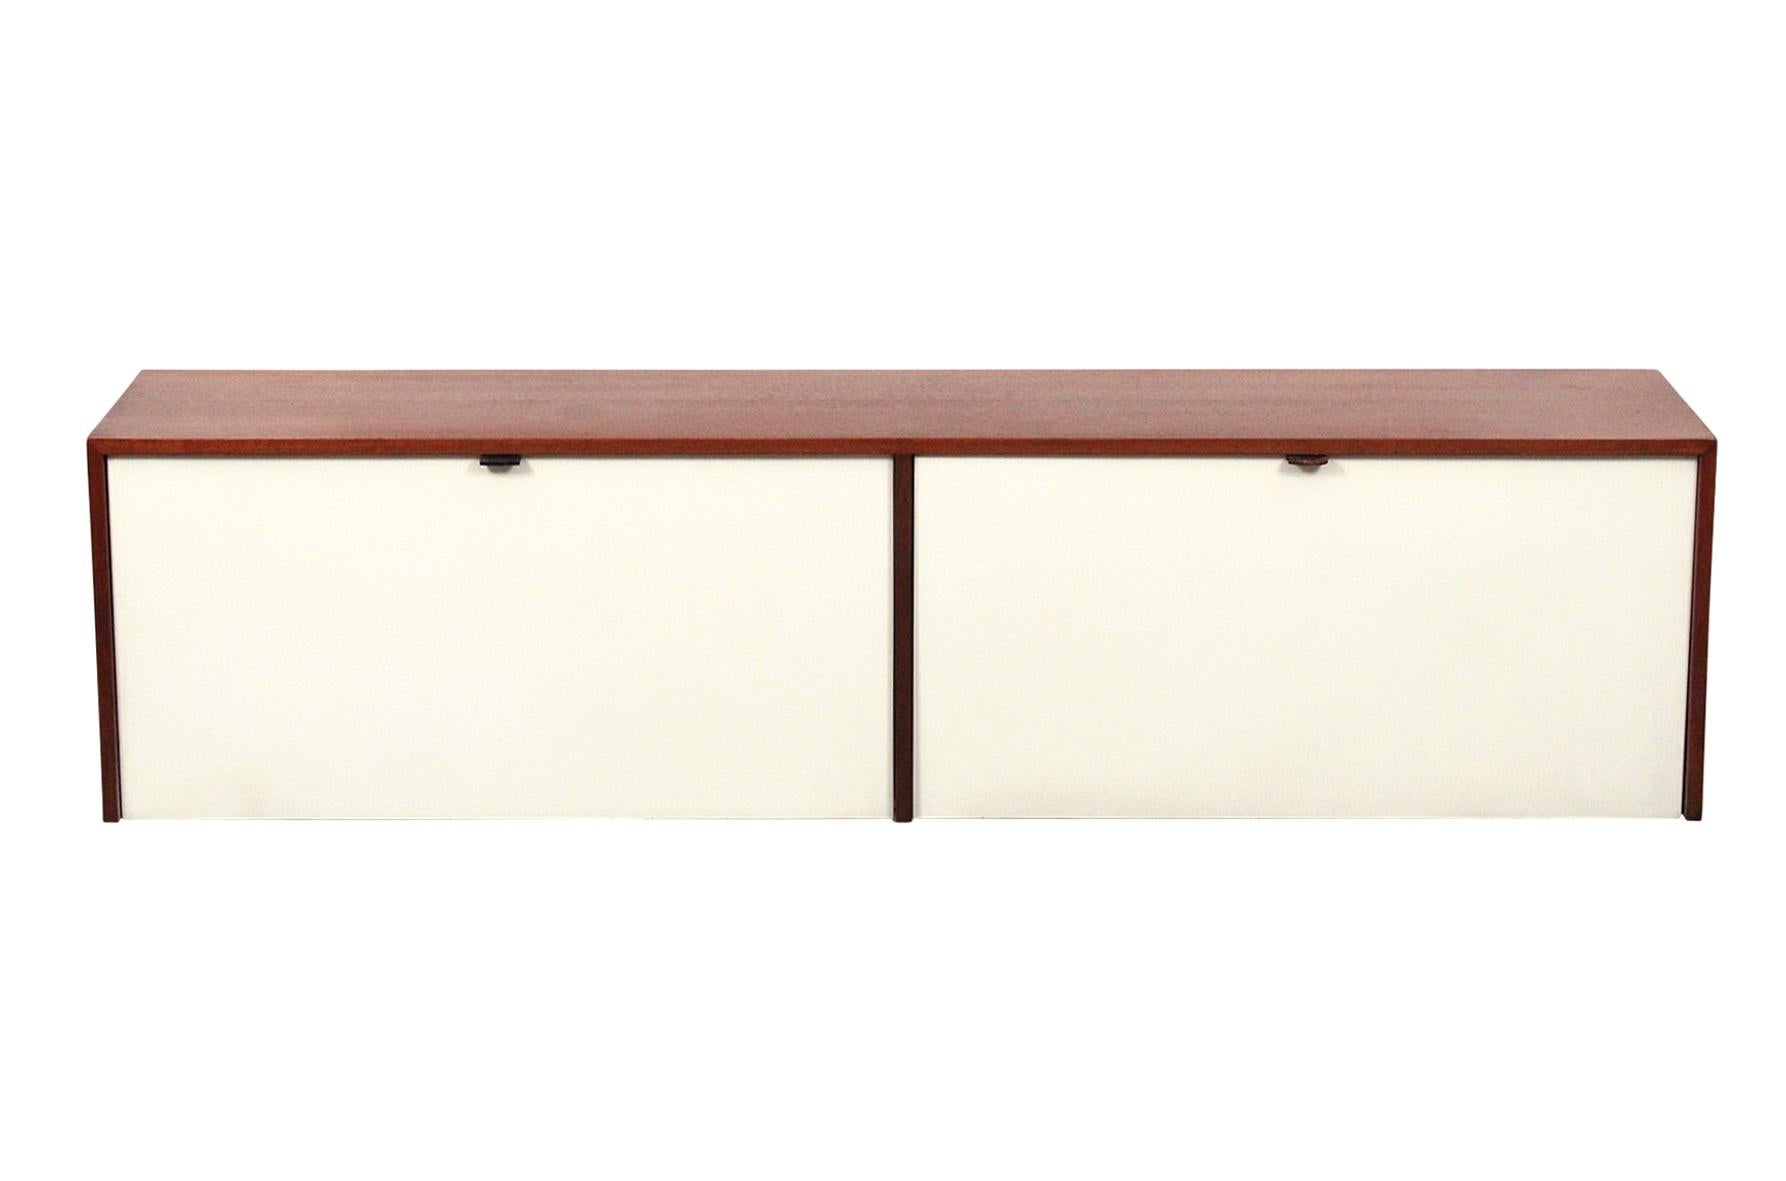 Wall-mounted cabinet by Florence Knoll for Knoll Associates. Walnut case with original white lacquered doors and interior. Interior has shelves of both oak and glass. This is cabinet model 